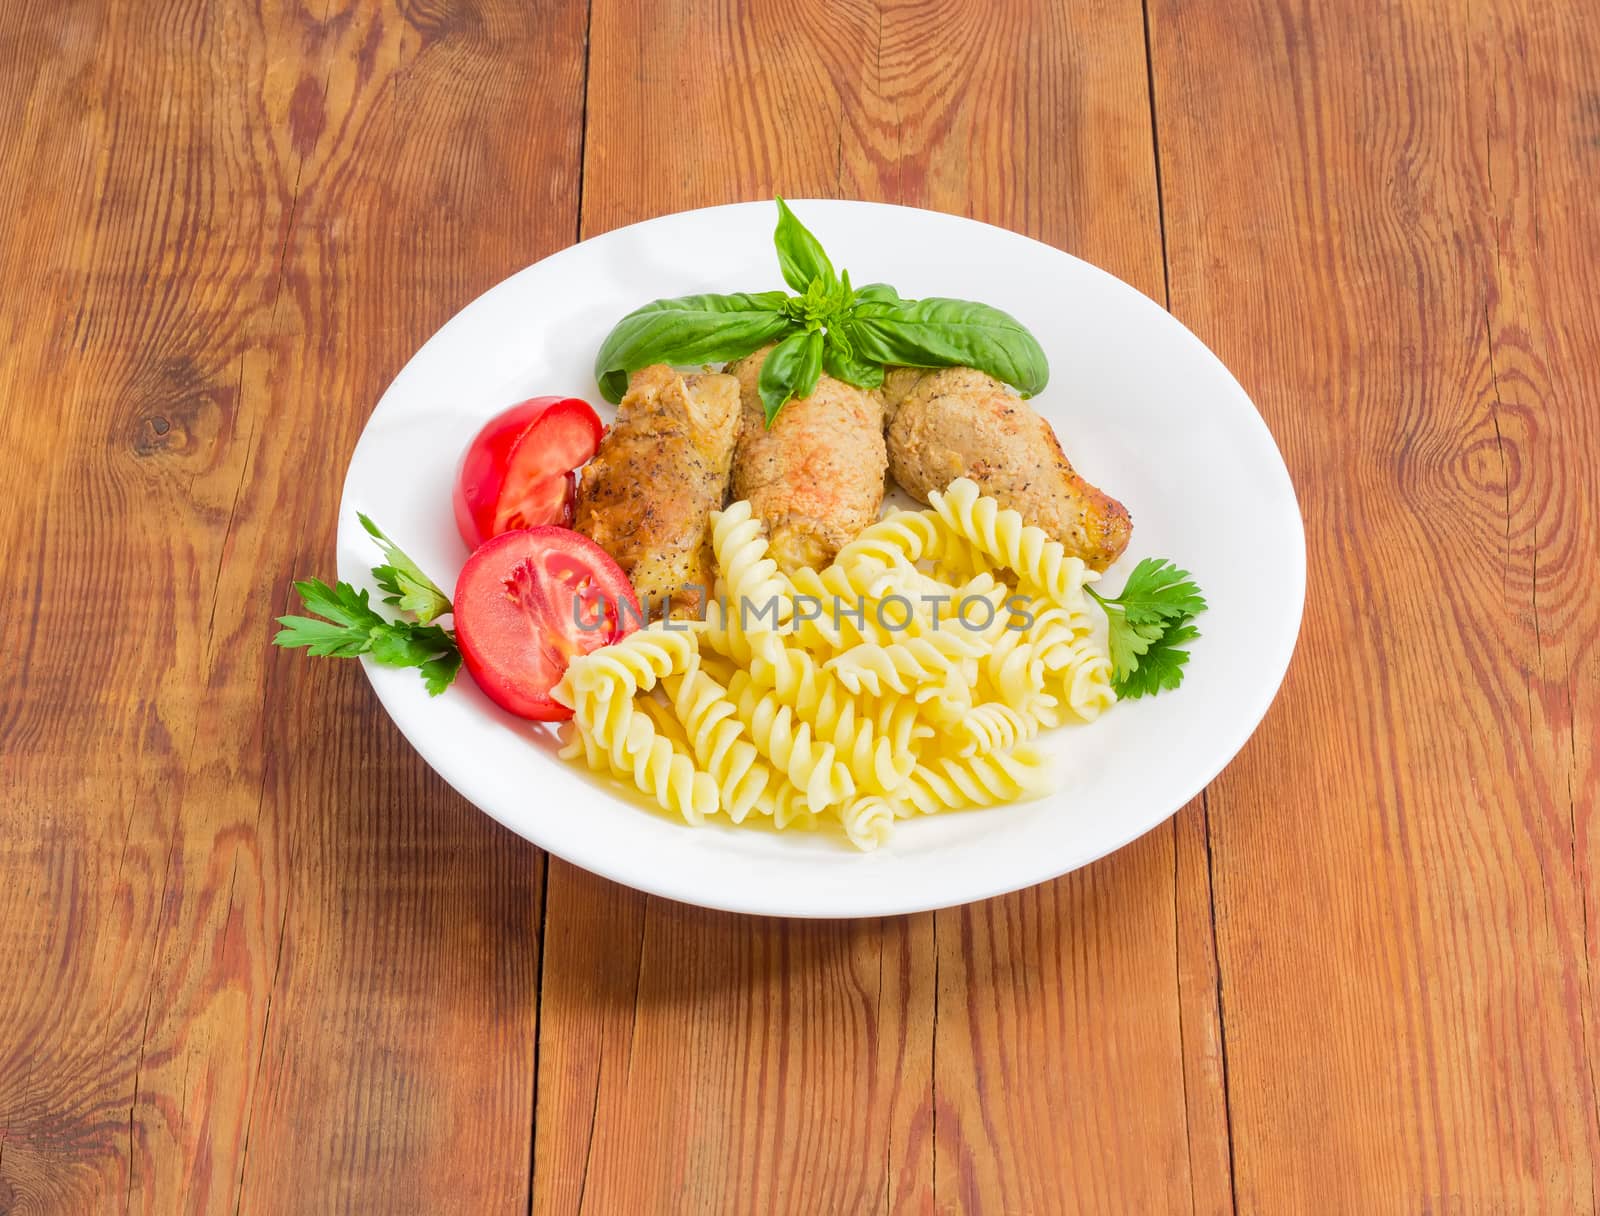 Braised meat roulades with filling from bread dried crusts and mushrooms, tomato and spiral pasta decorated with basil and parsley twigs on a white dish on a surface of an old wooden planks
